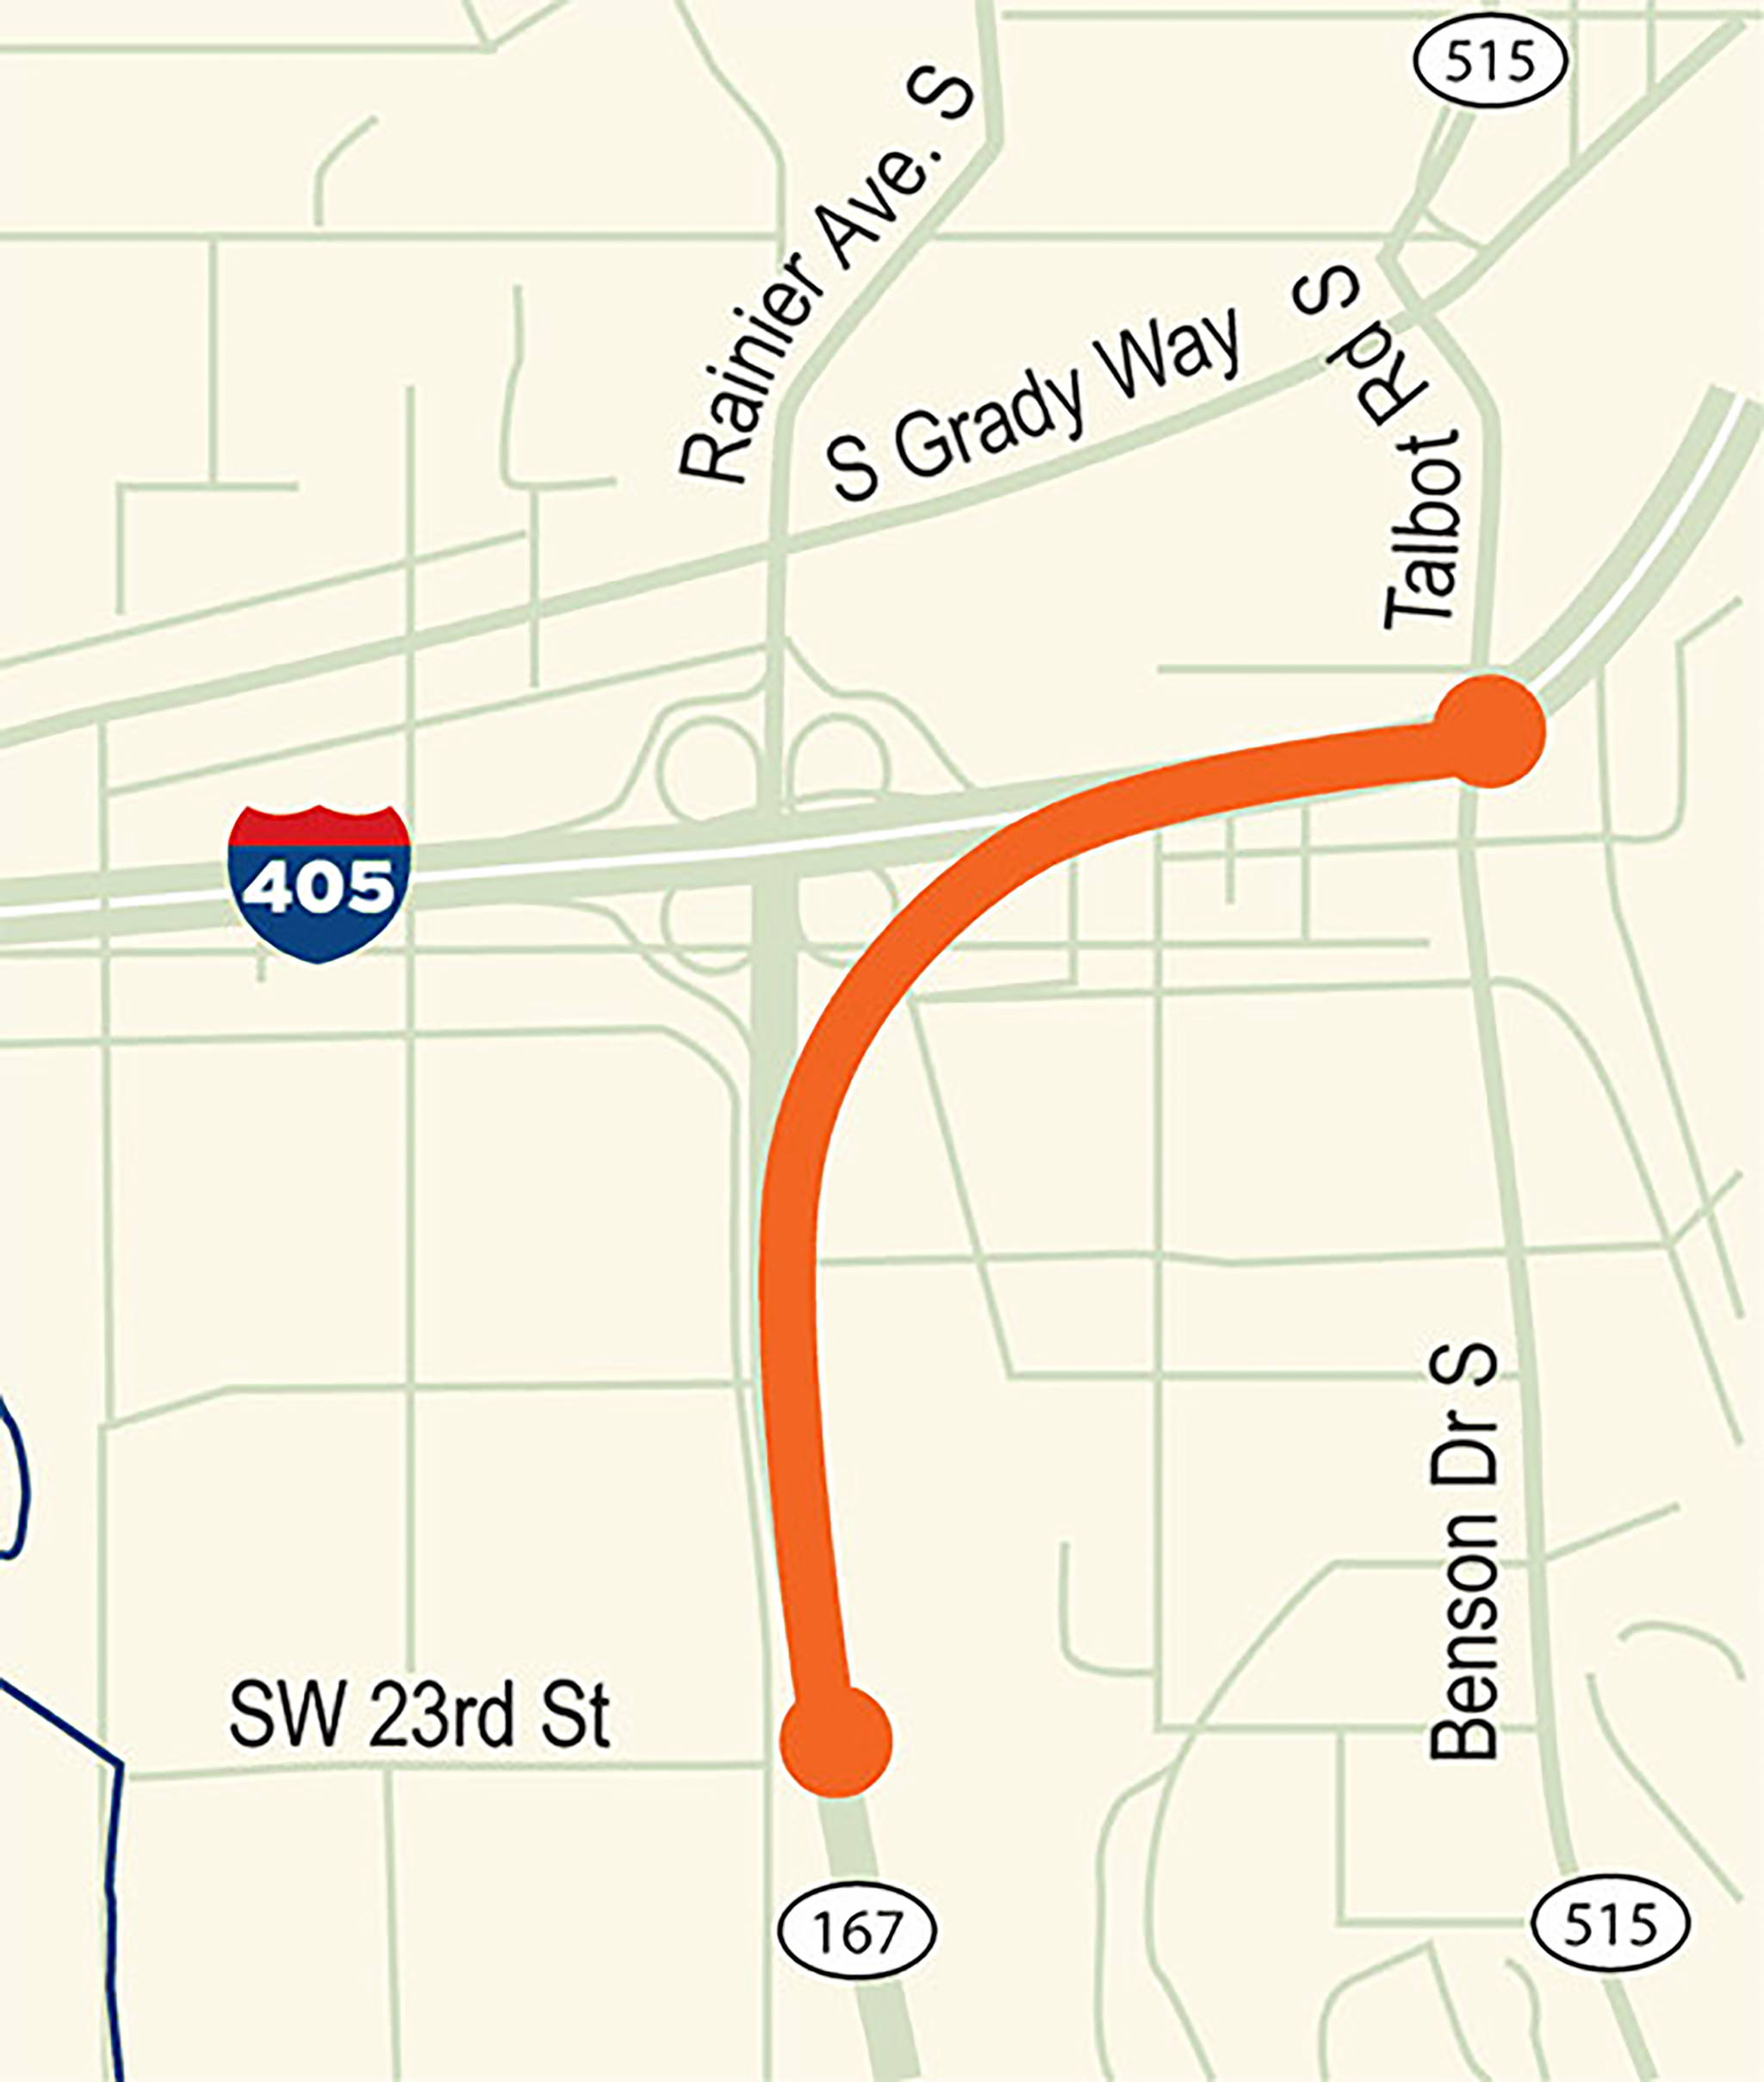 WSDOT will build a new flyover ramp connecting the HOT lanes on SR 167 to the carpool lanes on I-405 in Renton. This ramp is designed to improve traffic flow and safety at this critical interchange. COURTESY MAP, WSDOT